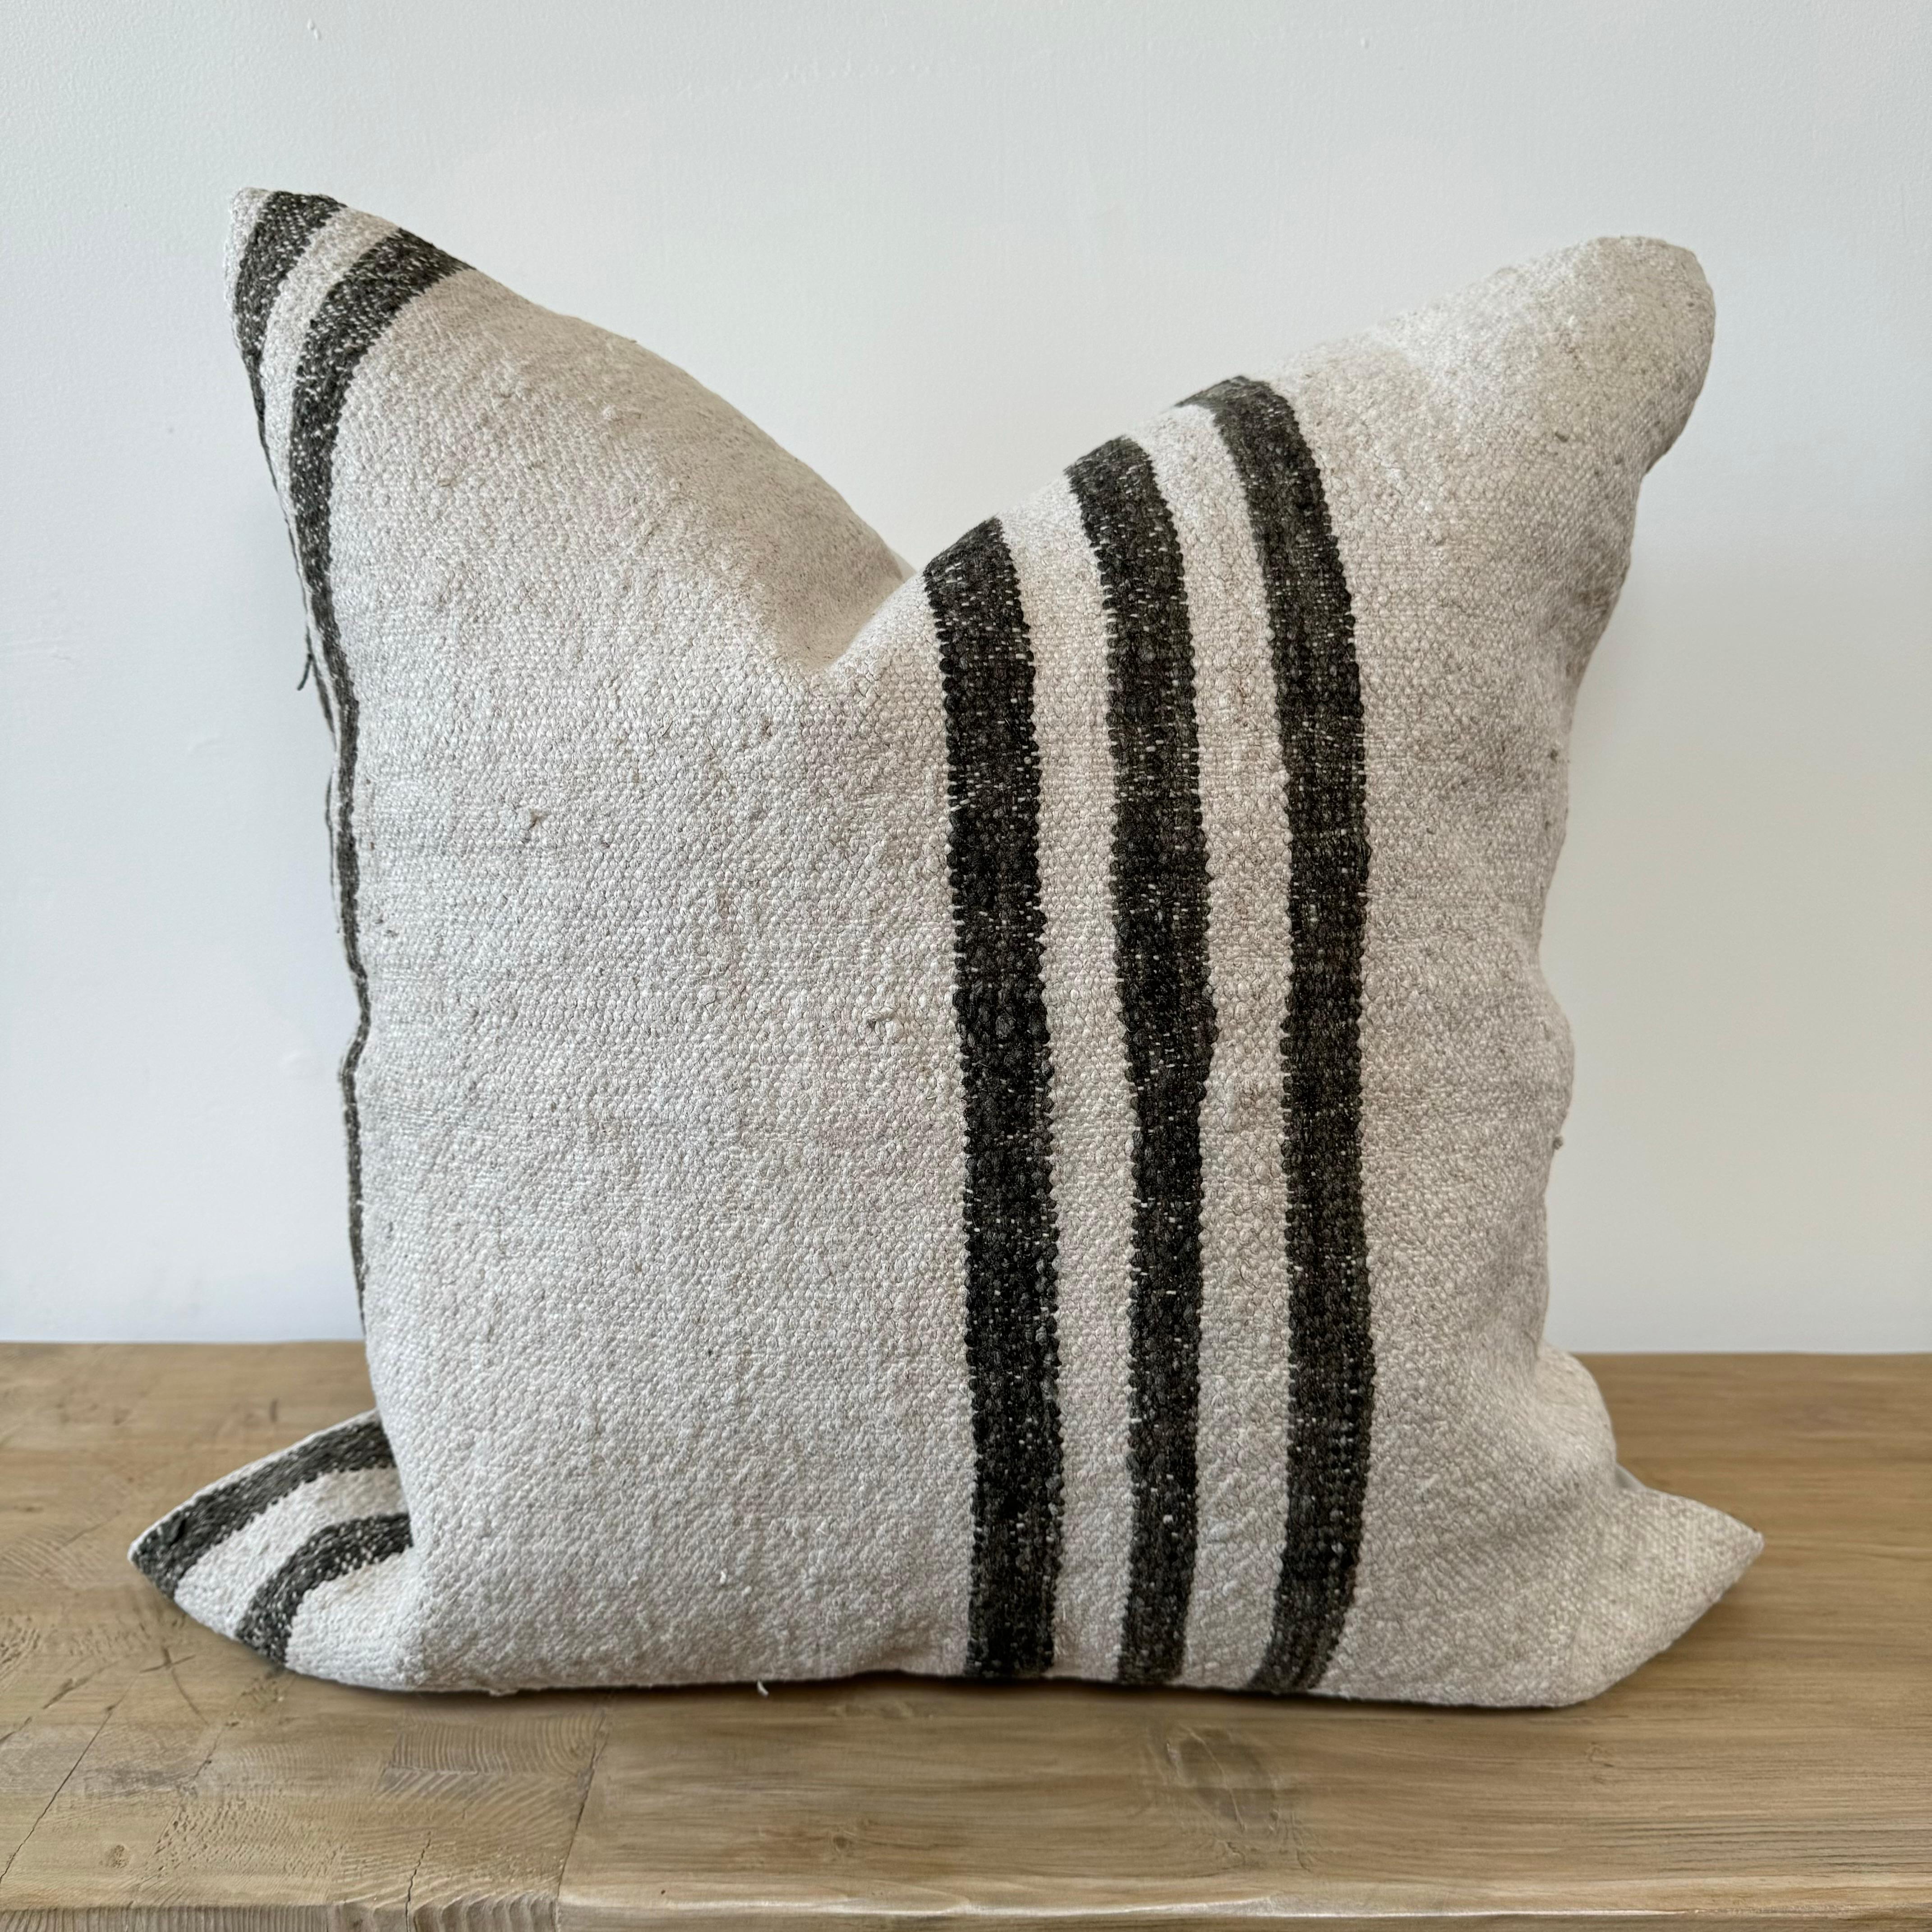 Creamy white hemp rug pillow with brown stripes. 
Soft hand, cotton backing with zipper closure
Includes down/feather insert.
Spot cleaning is recommended, or dry clean. These rugs have been professionally cleaned prior to construction. These